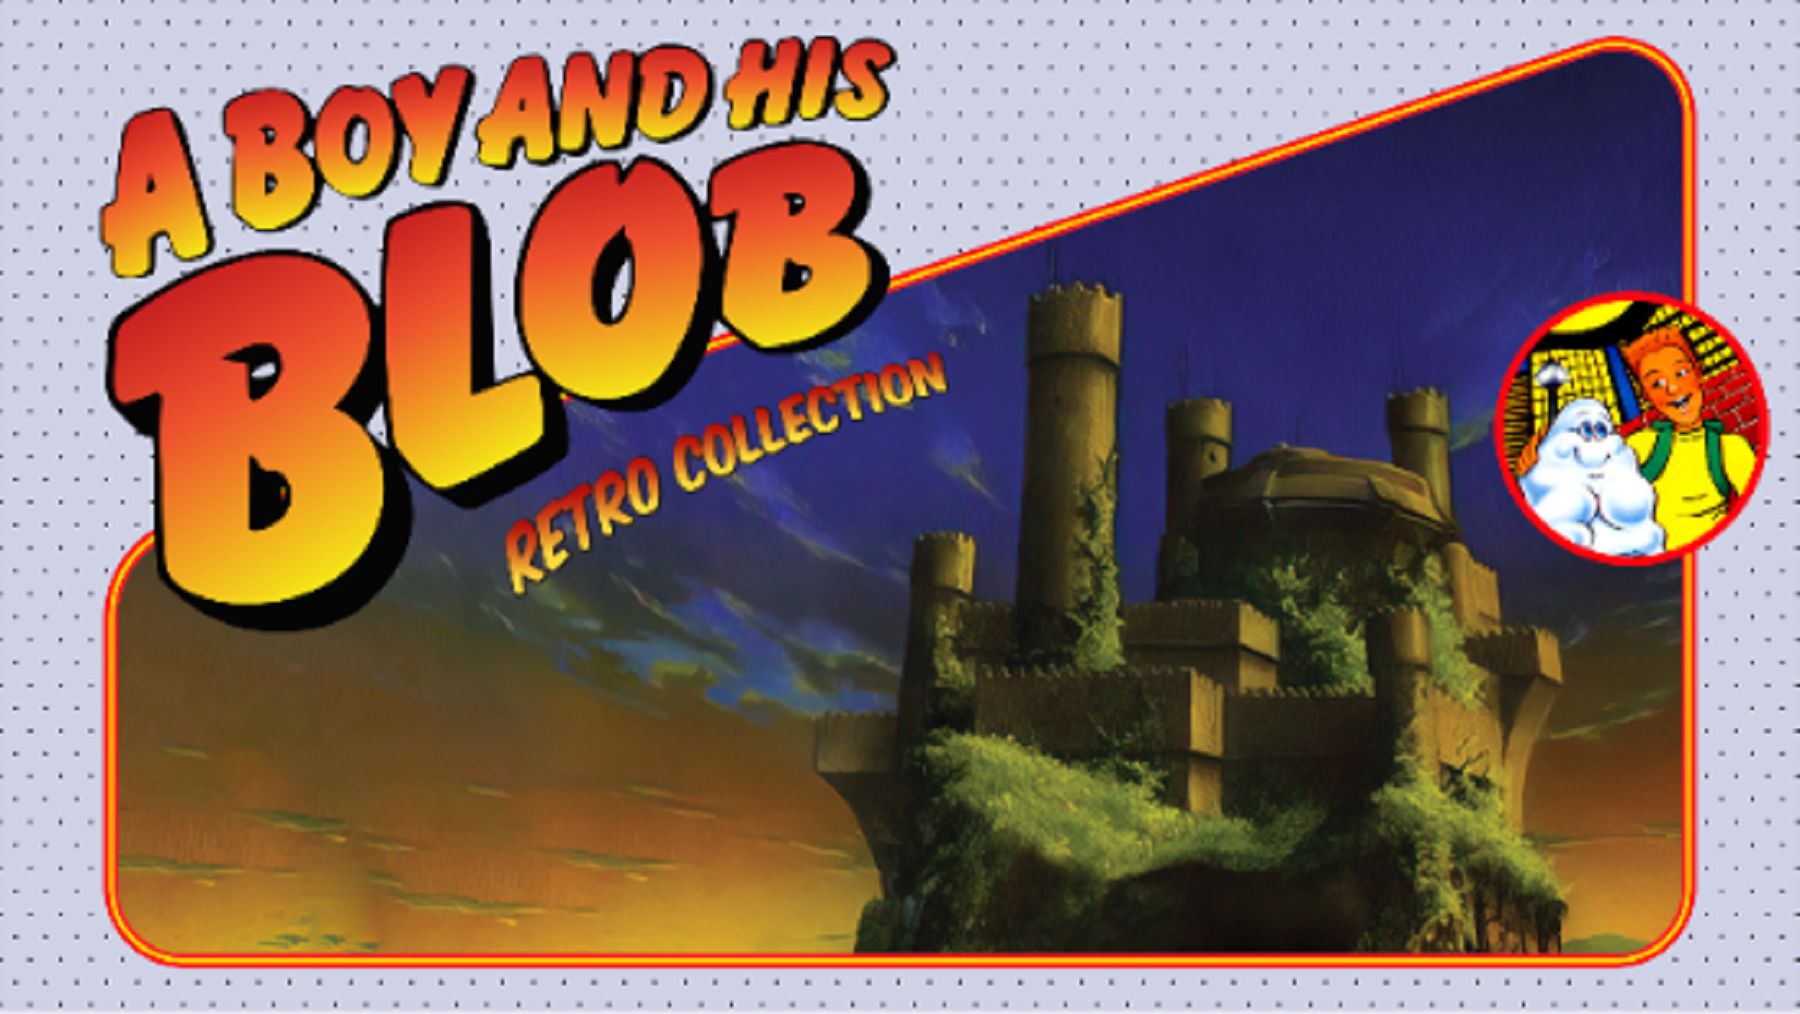 Ready Your Jelly Beans, A Boy and His Blob: Retro Collection is Now Available for PlayStation and Switch